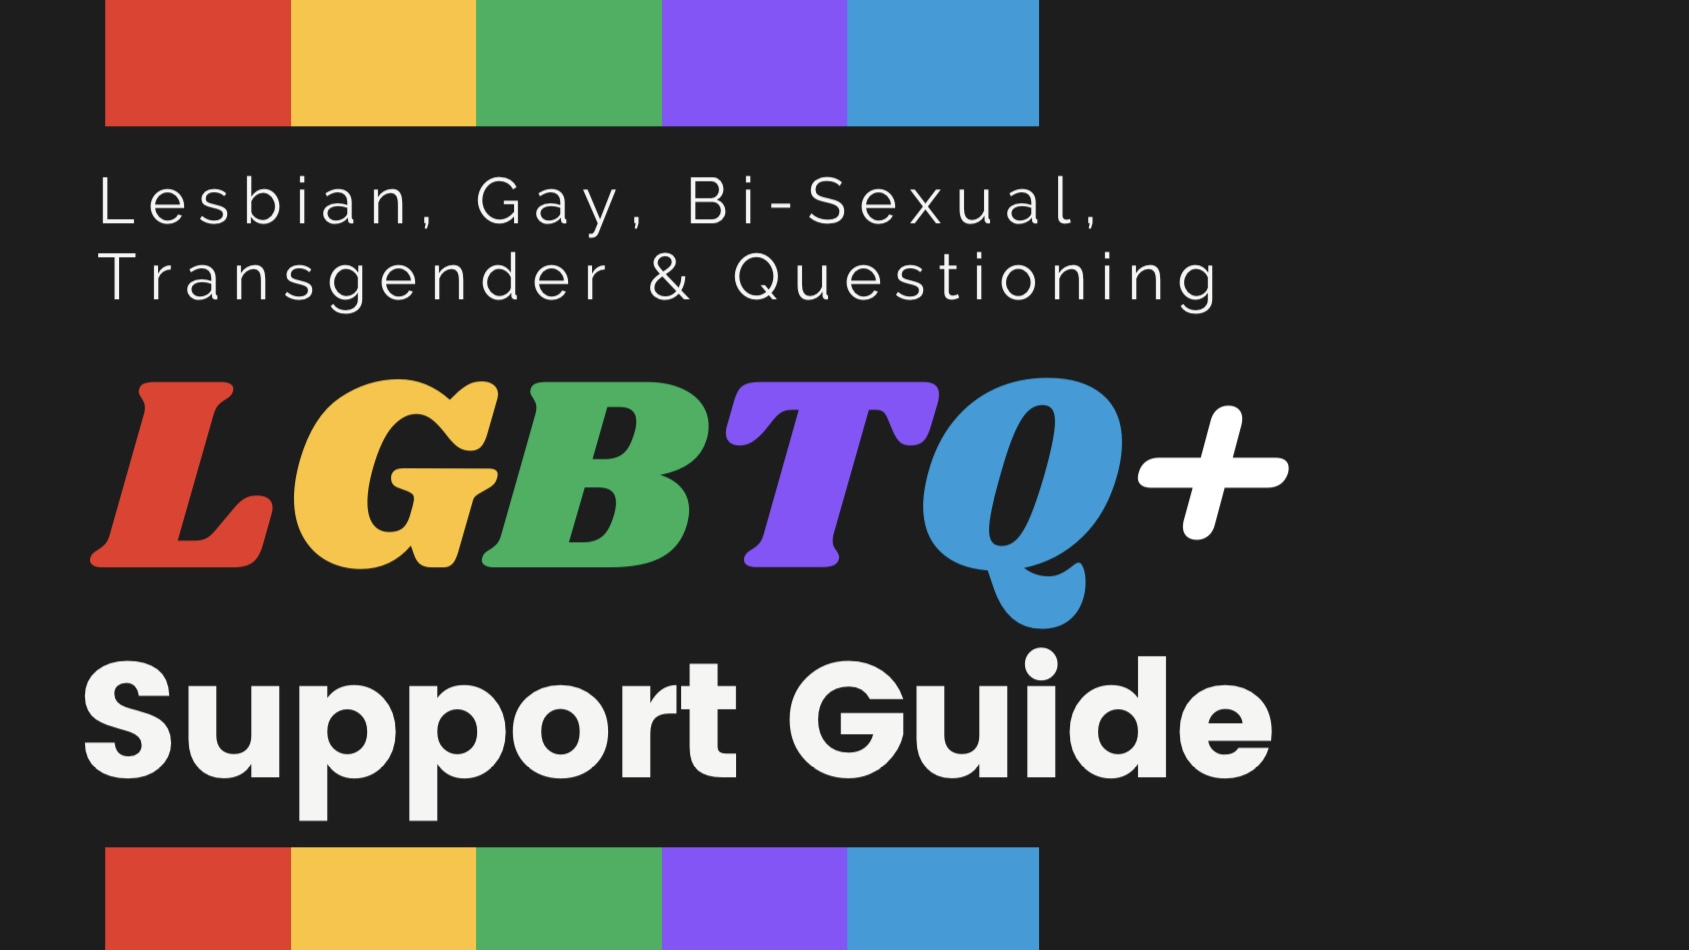 A screenshot of the front page of Duval Schools' LGTBQ+ Support Guide that is black, with a vertical rainbow and the text "Lesbian, Gay, Bi-Sexual, Transgender & Questioning LGBTQ+ Support Guide."